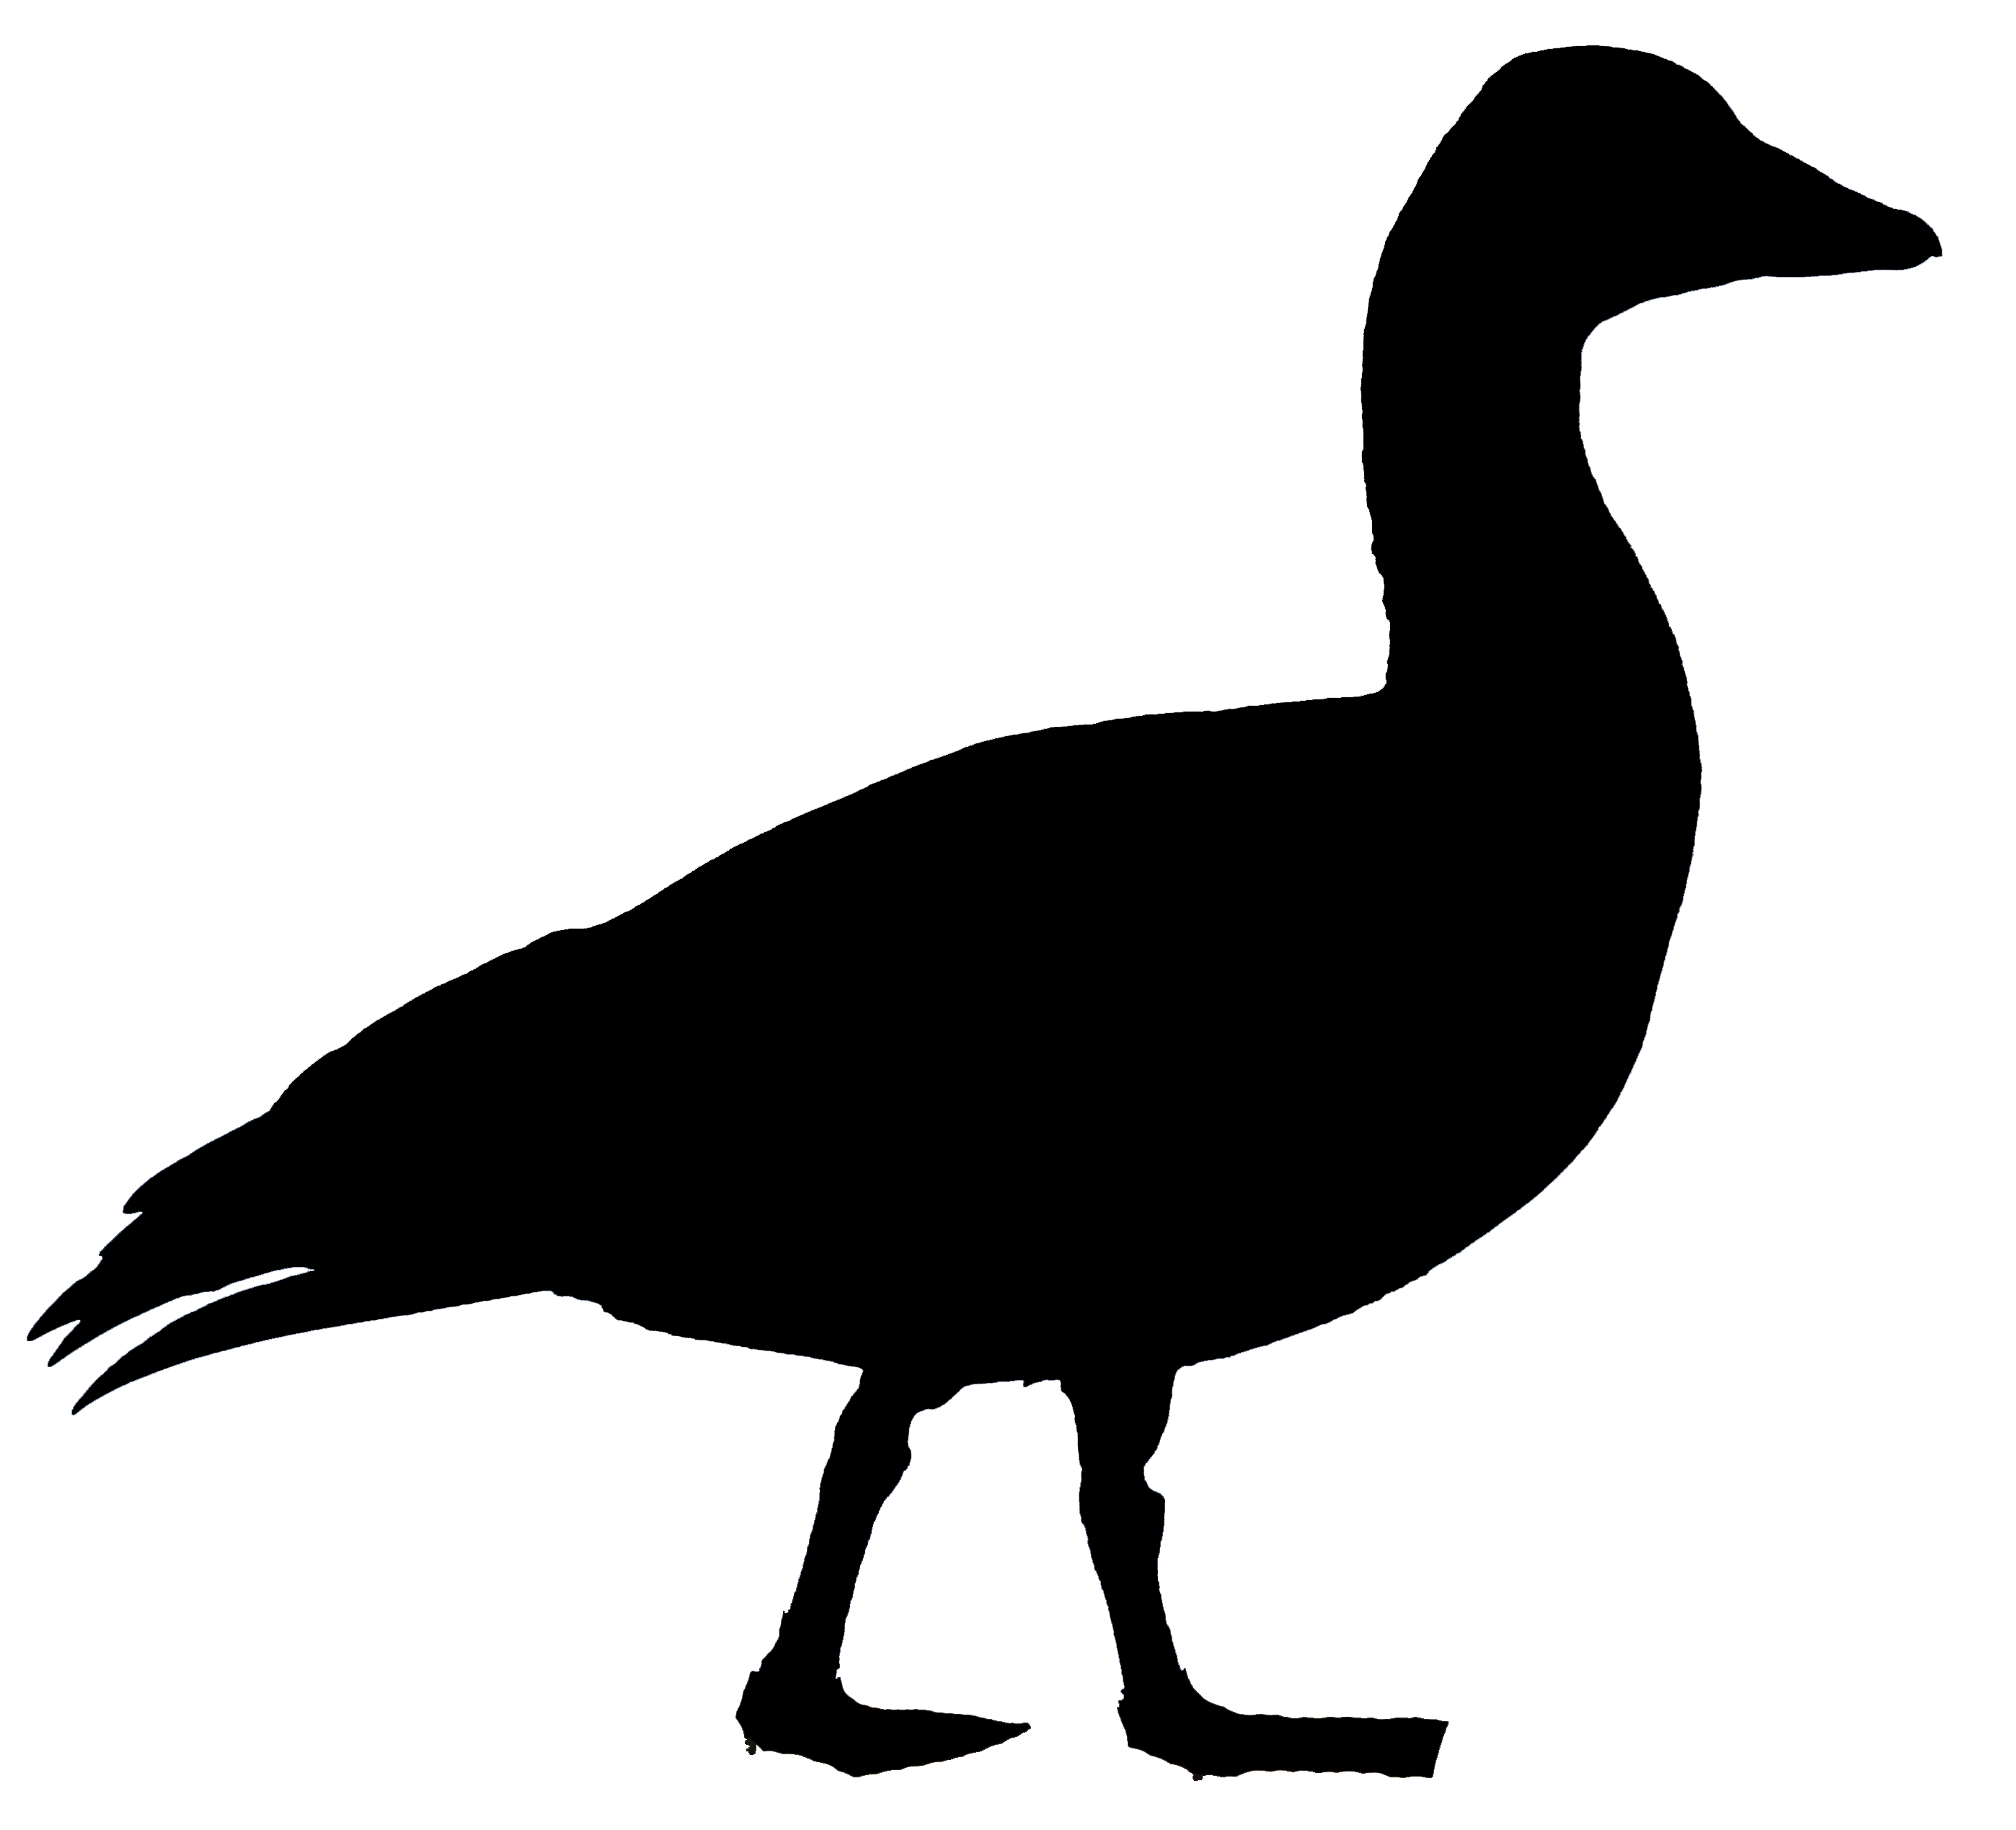 Silhouette at getdrawings com. Goose clipart snow goose